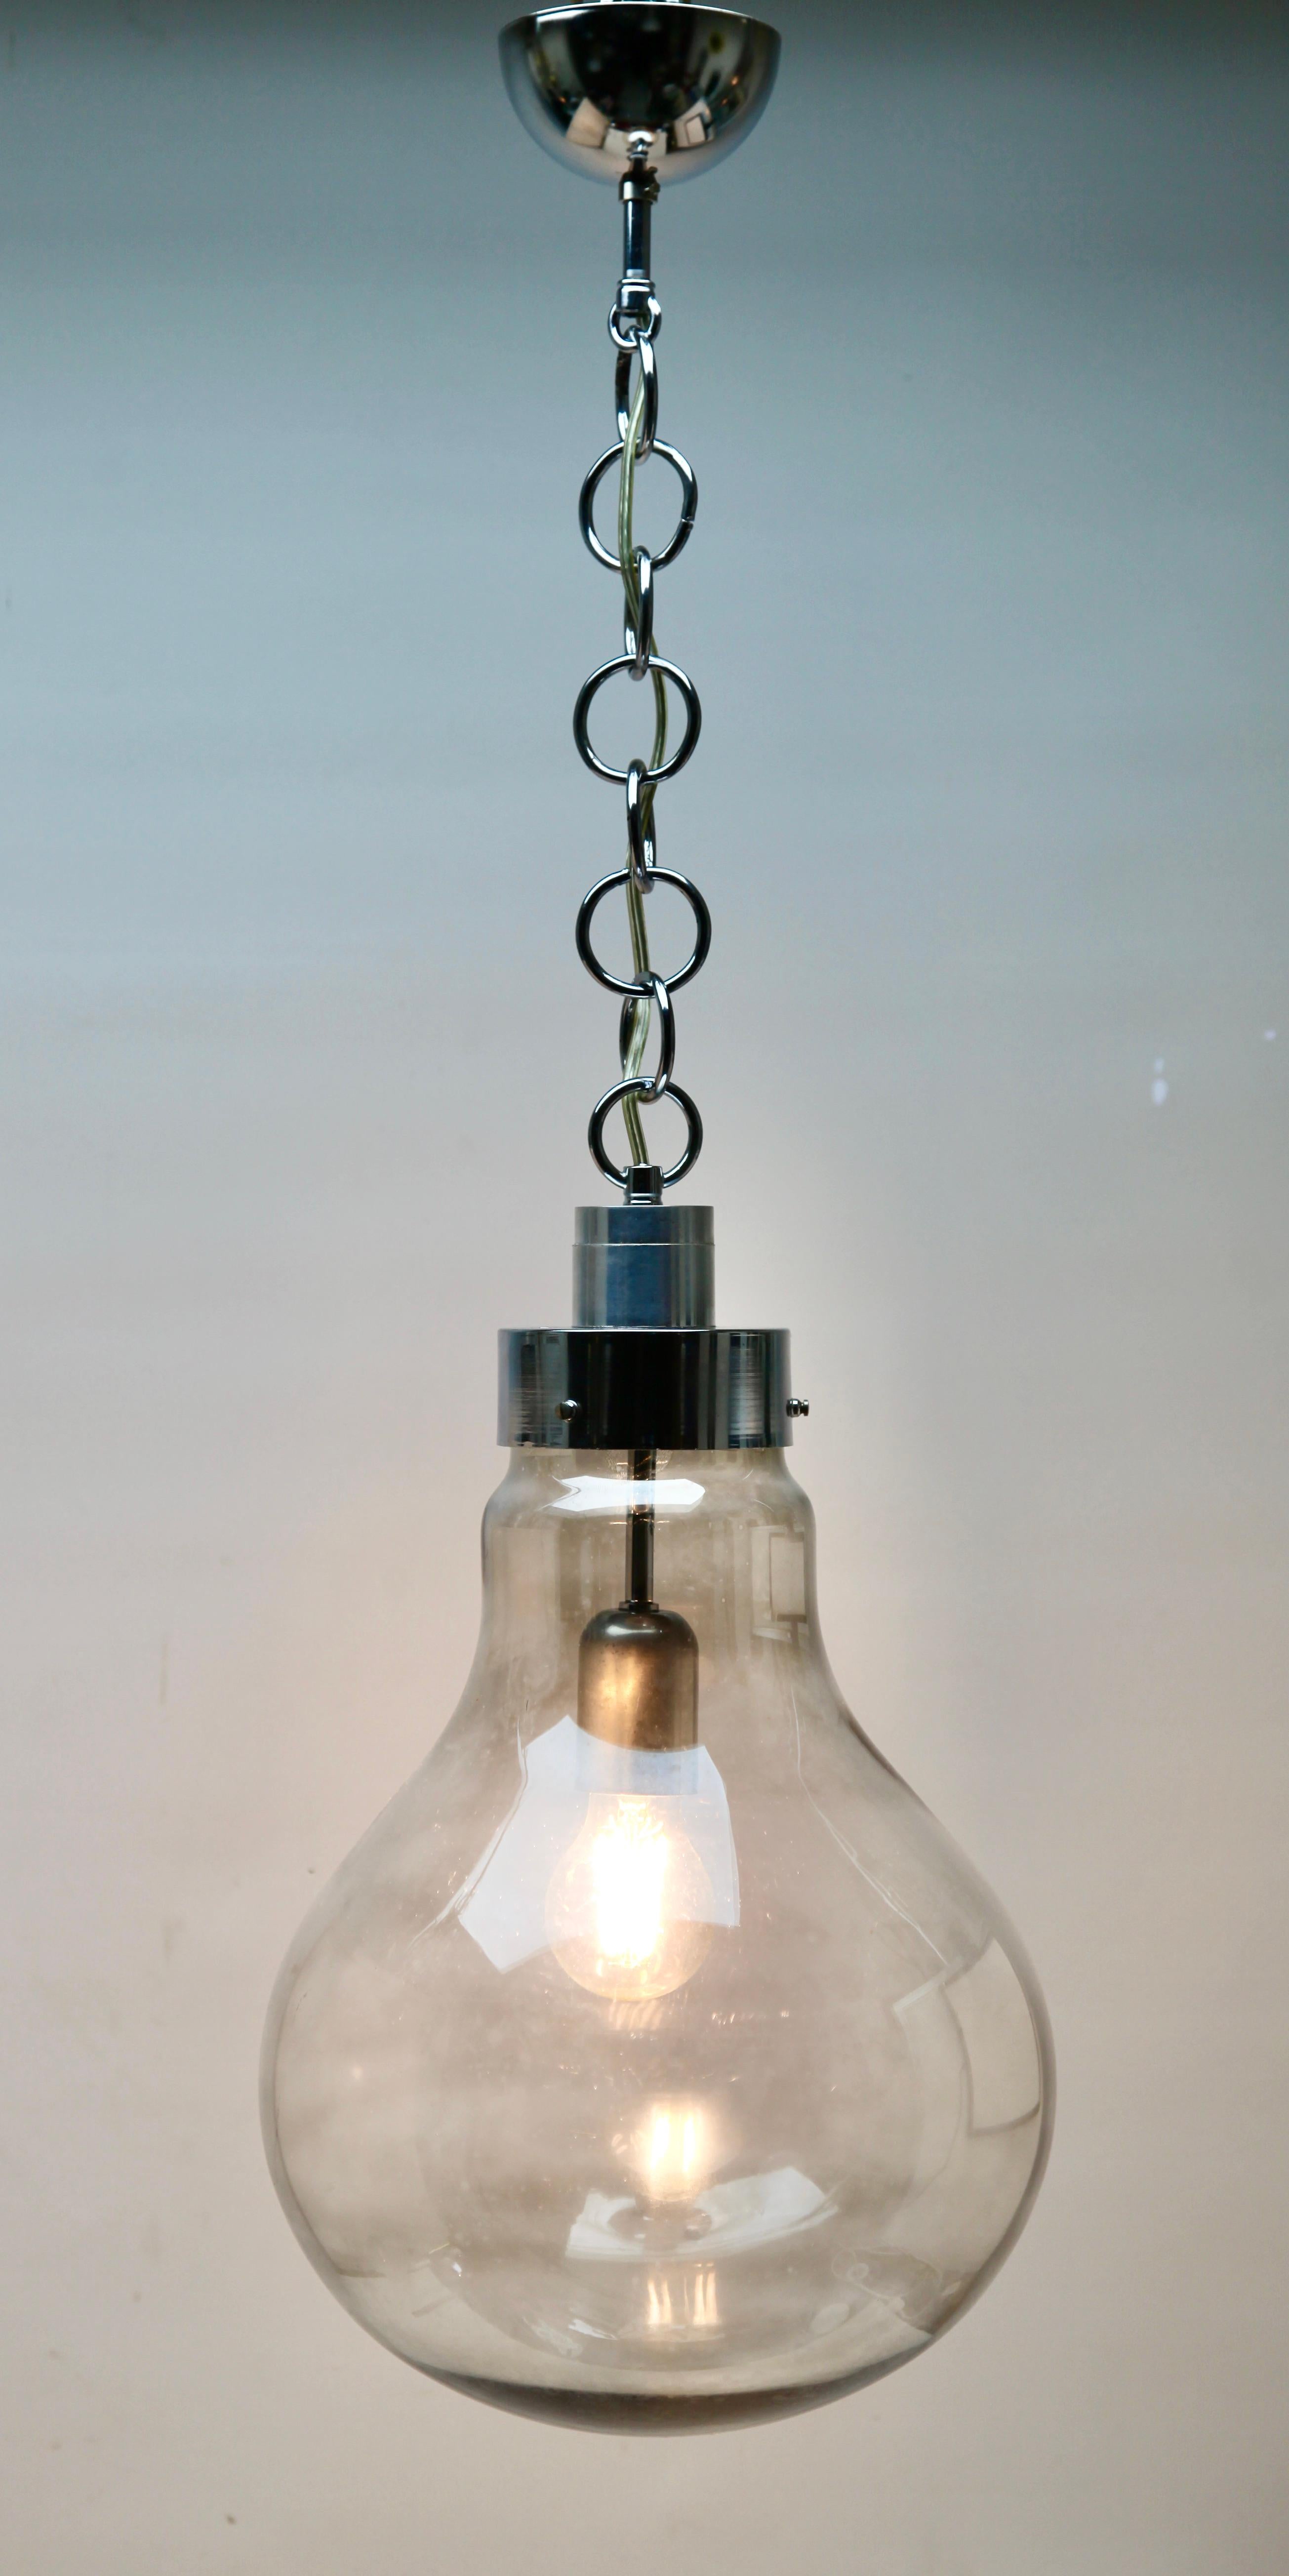 Mid-20th Century Vintage Pendant Ceiling Light in the Schape of a Big Bulb, Smoked Glass, 1960s For Sale